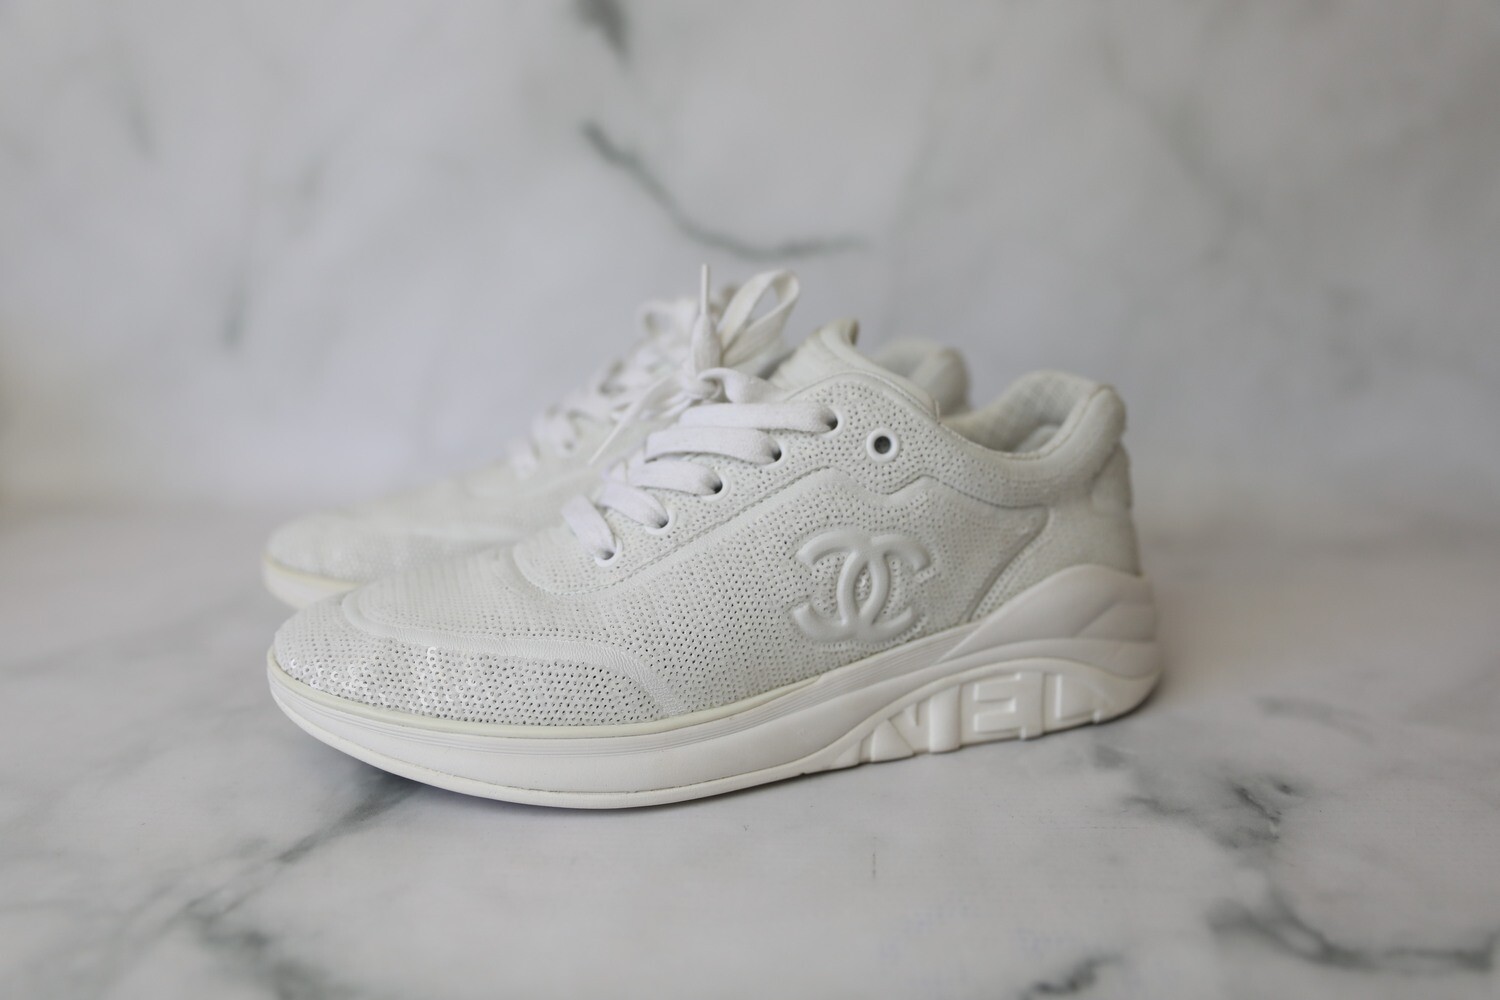 Chanel Shoes Sneakers, White Sequin, Size 40.5, Preowned in Dustbag WA001 -  Julia Rose Boston